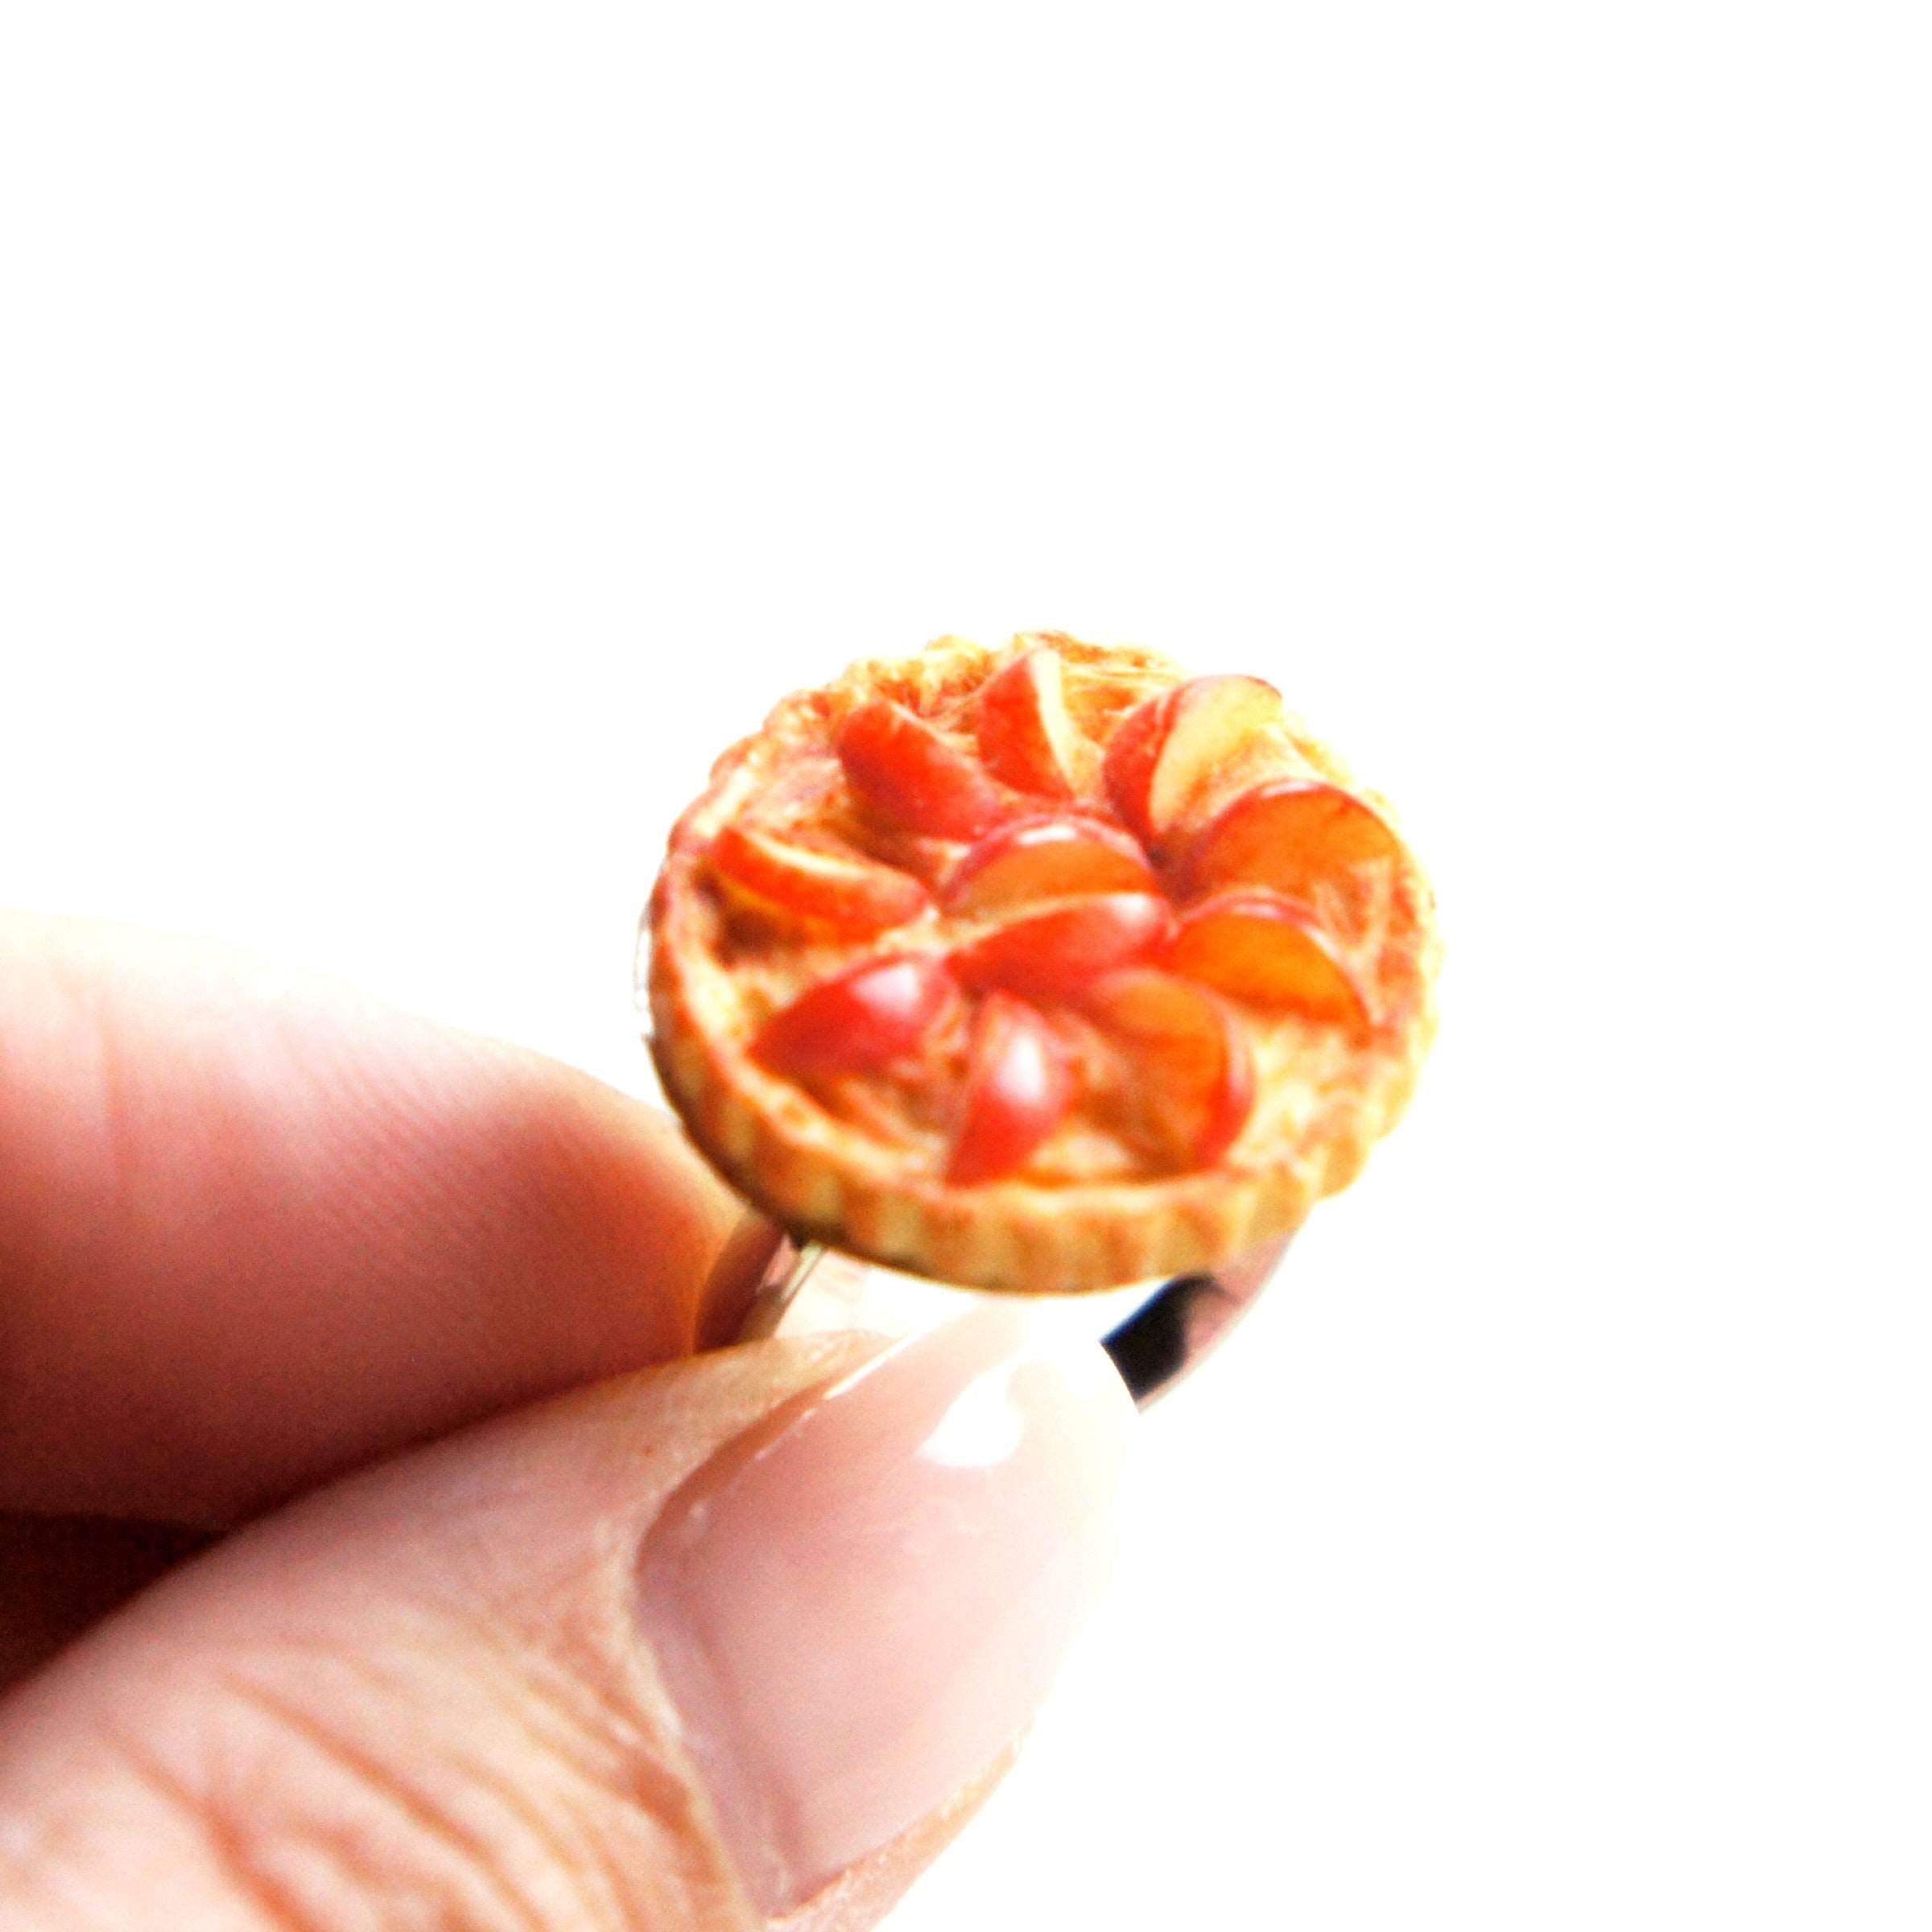 Apple Pie Ring - Jillicious charms and accessories